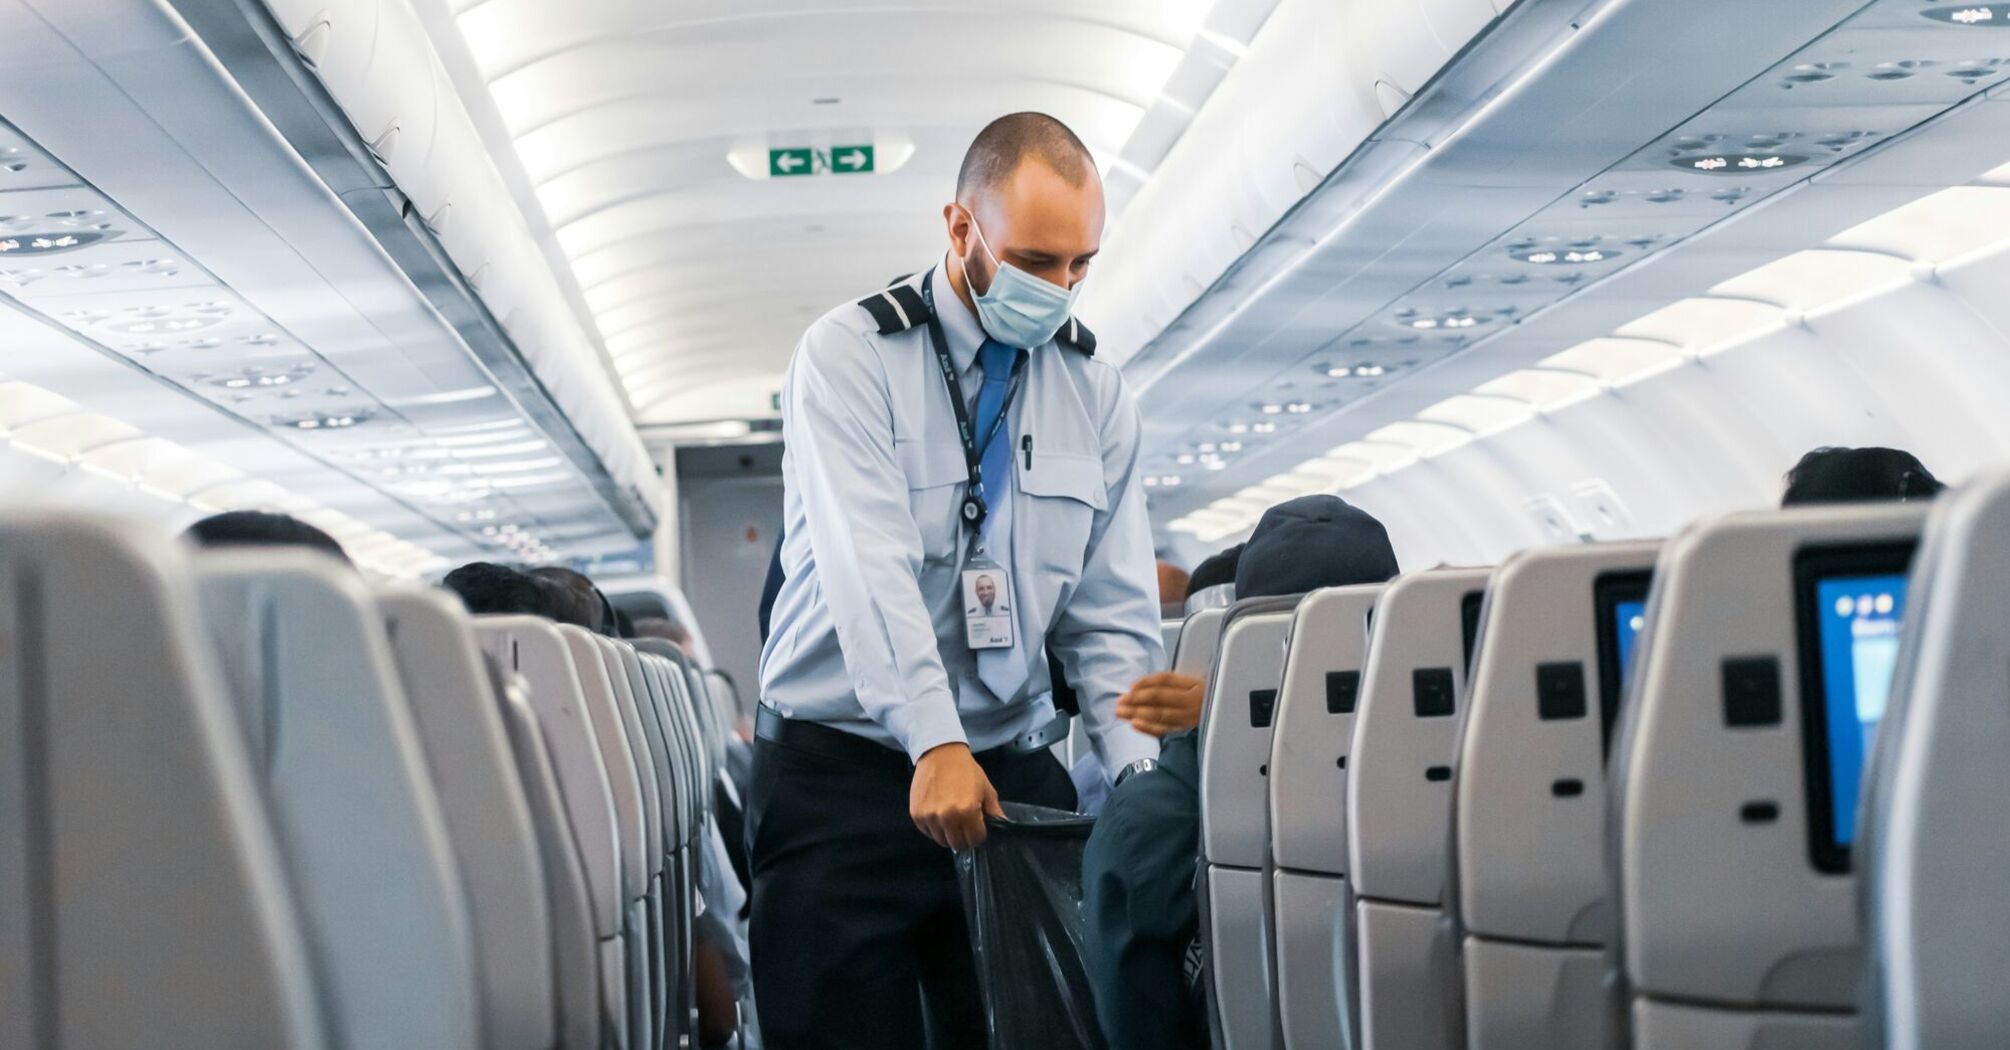 The flight attendant mentioned a common mistake among elderly passengers and explained how to avoid it